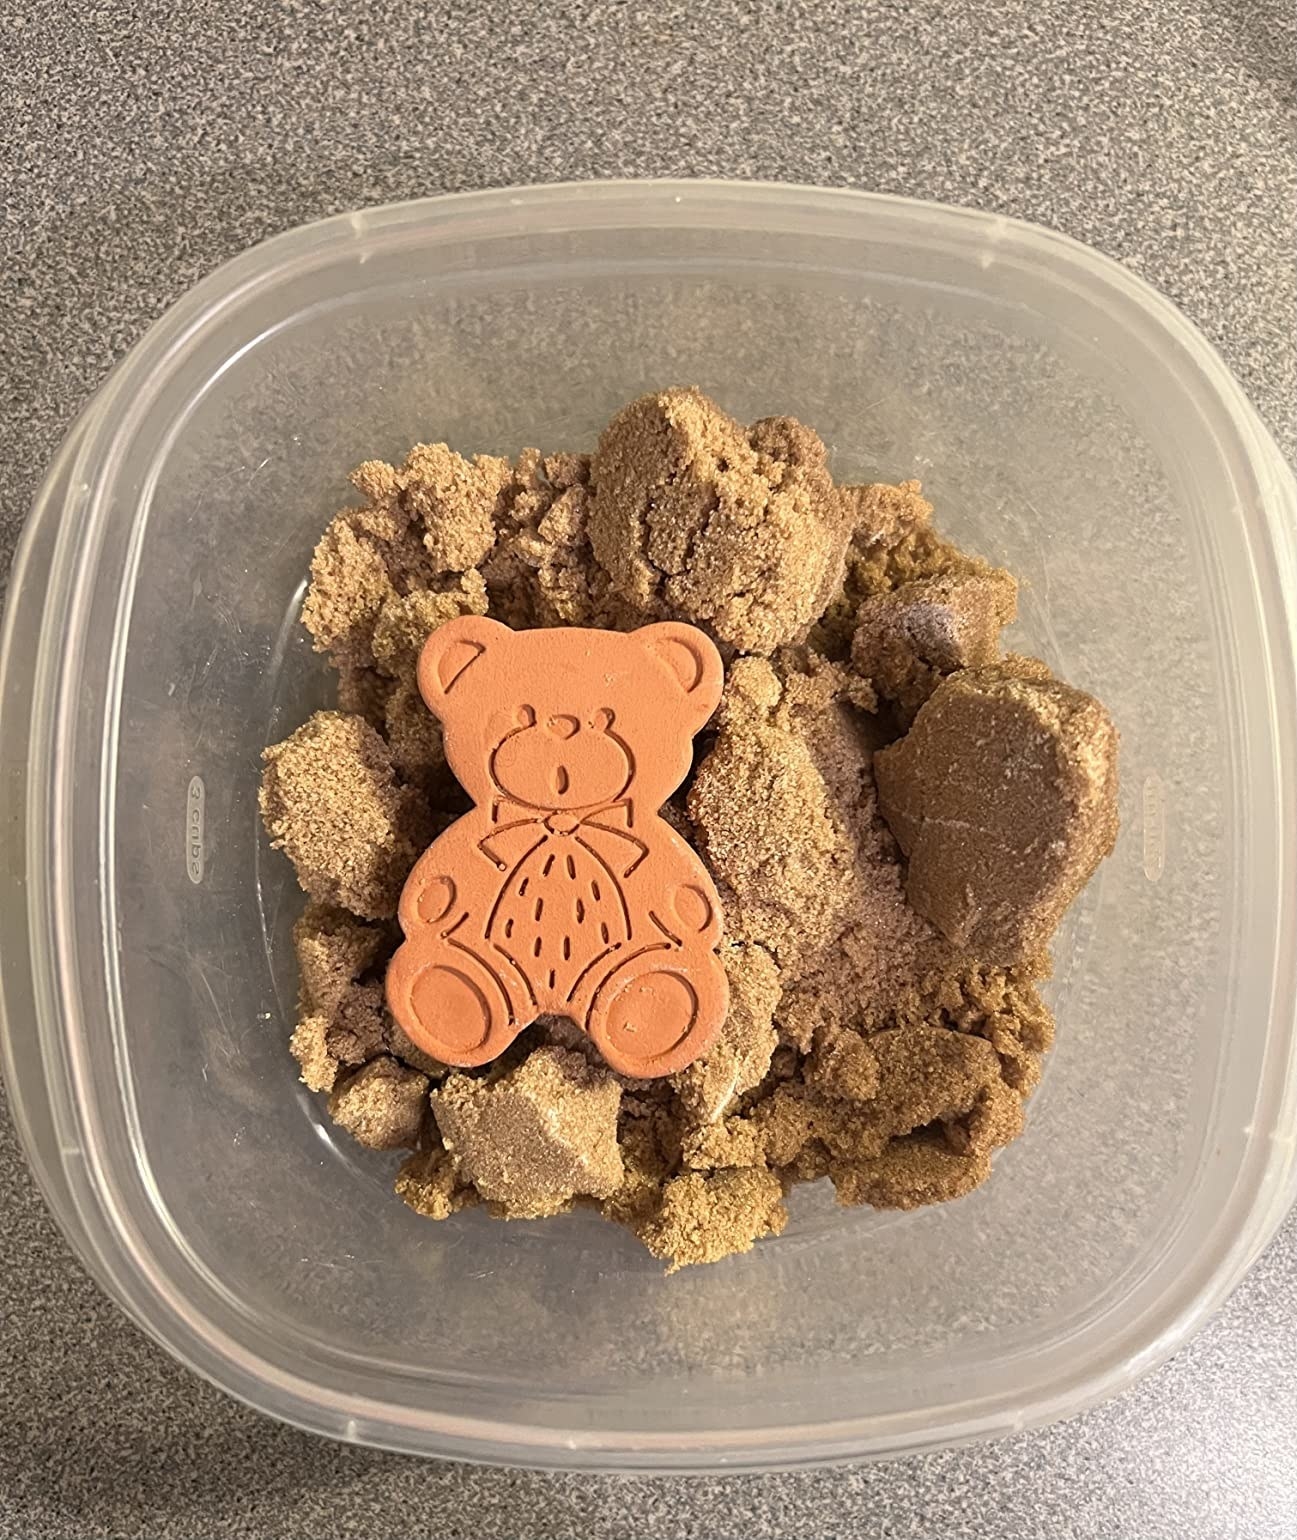 The clay bear in a container of brown sugar